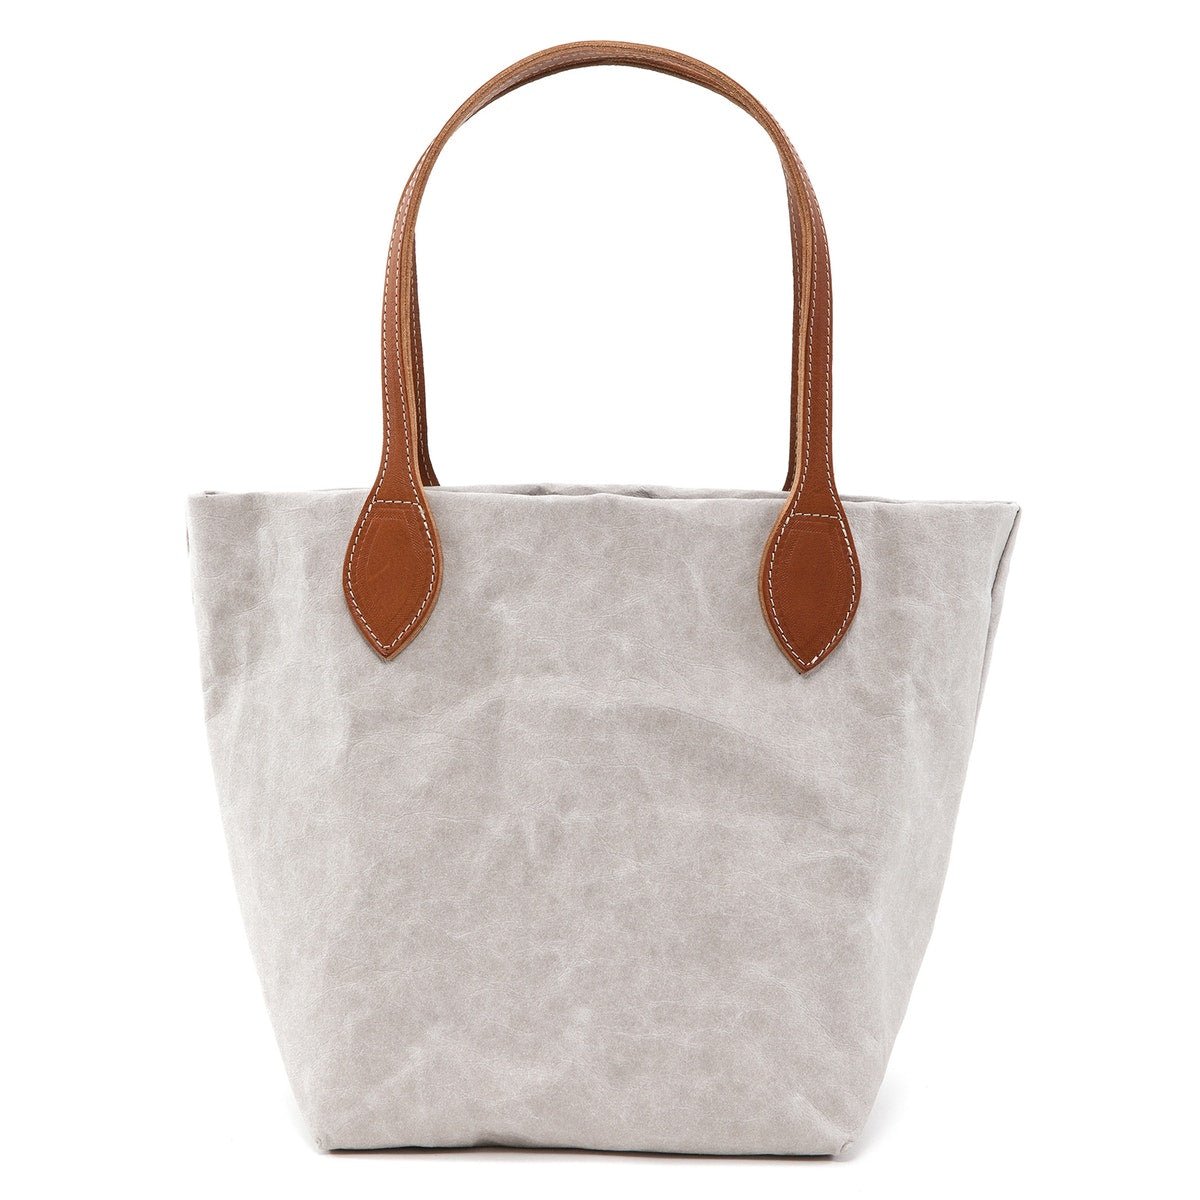 A small washable paper tote is shown. It has two long tan leather handles. The bag shown is pale grey.